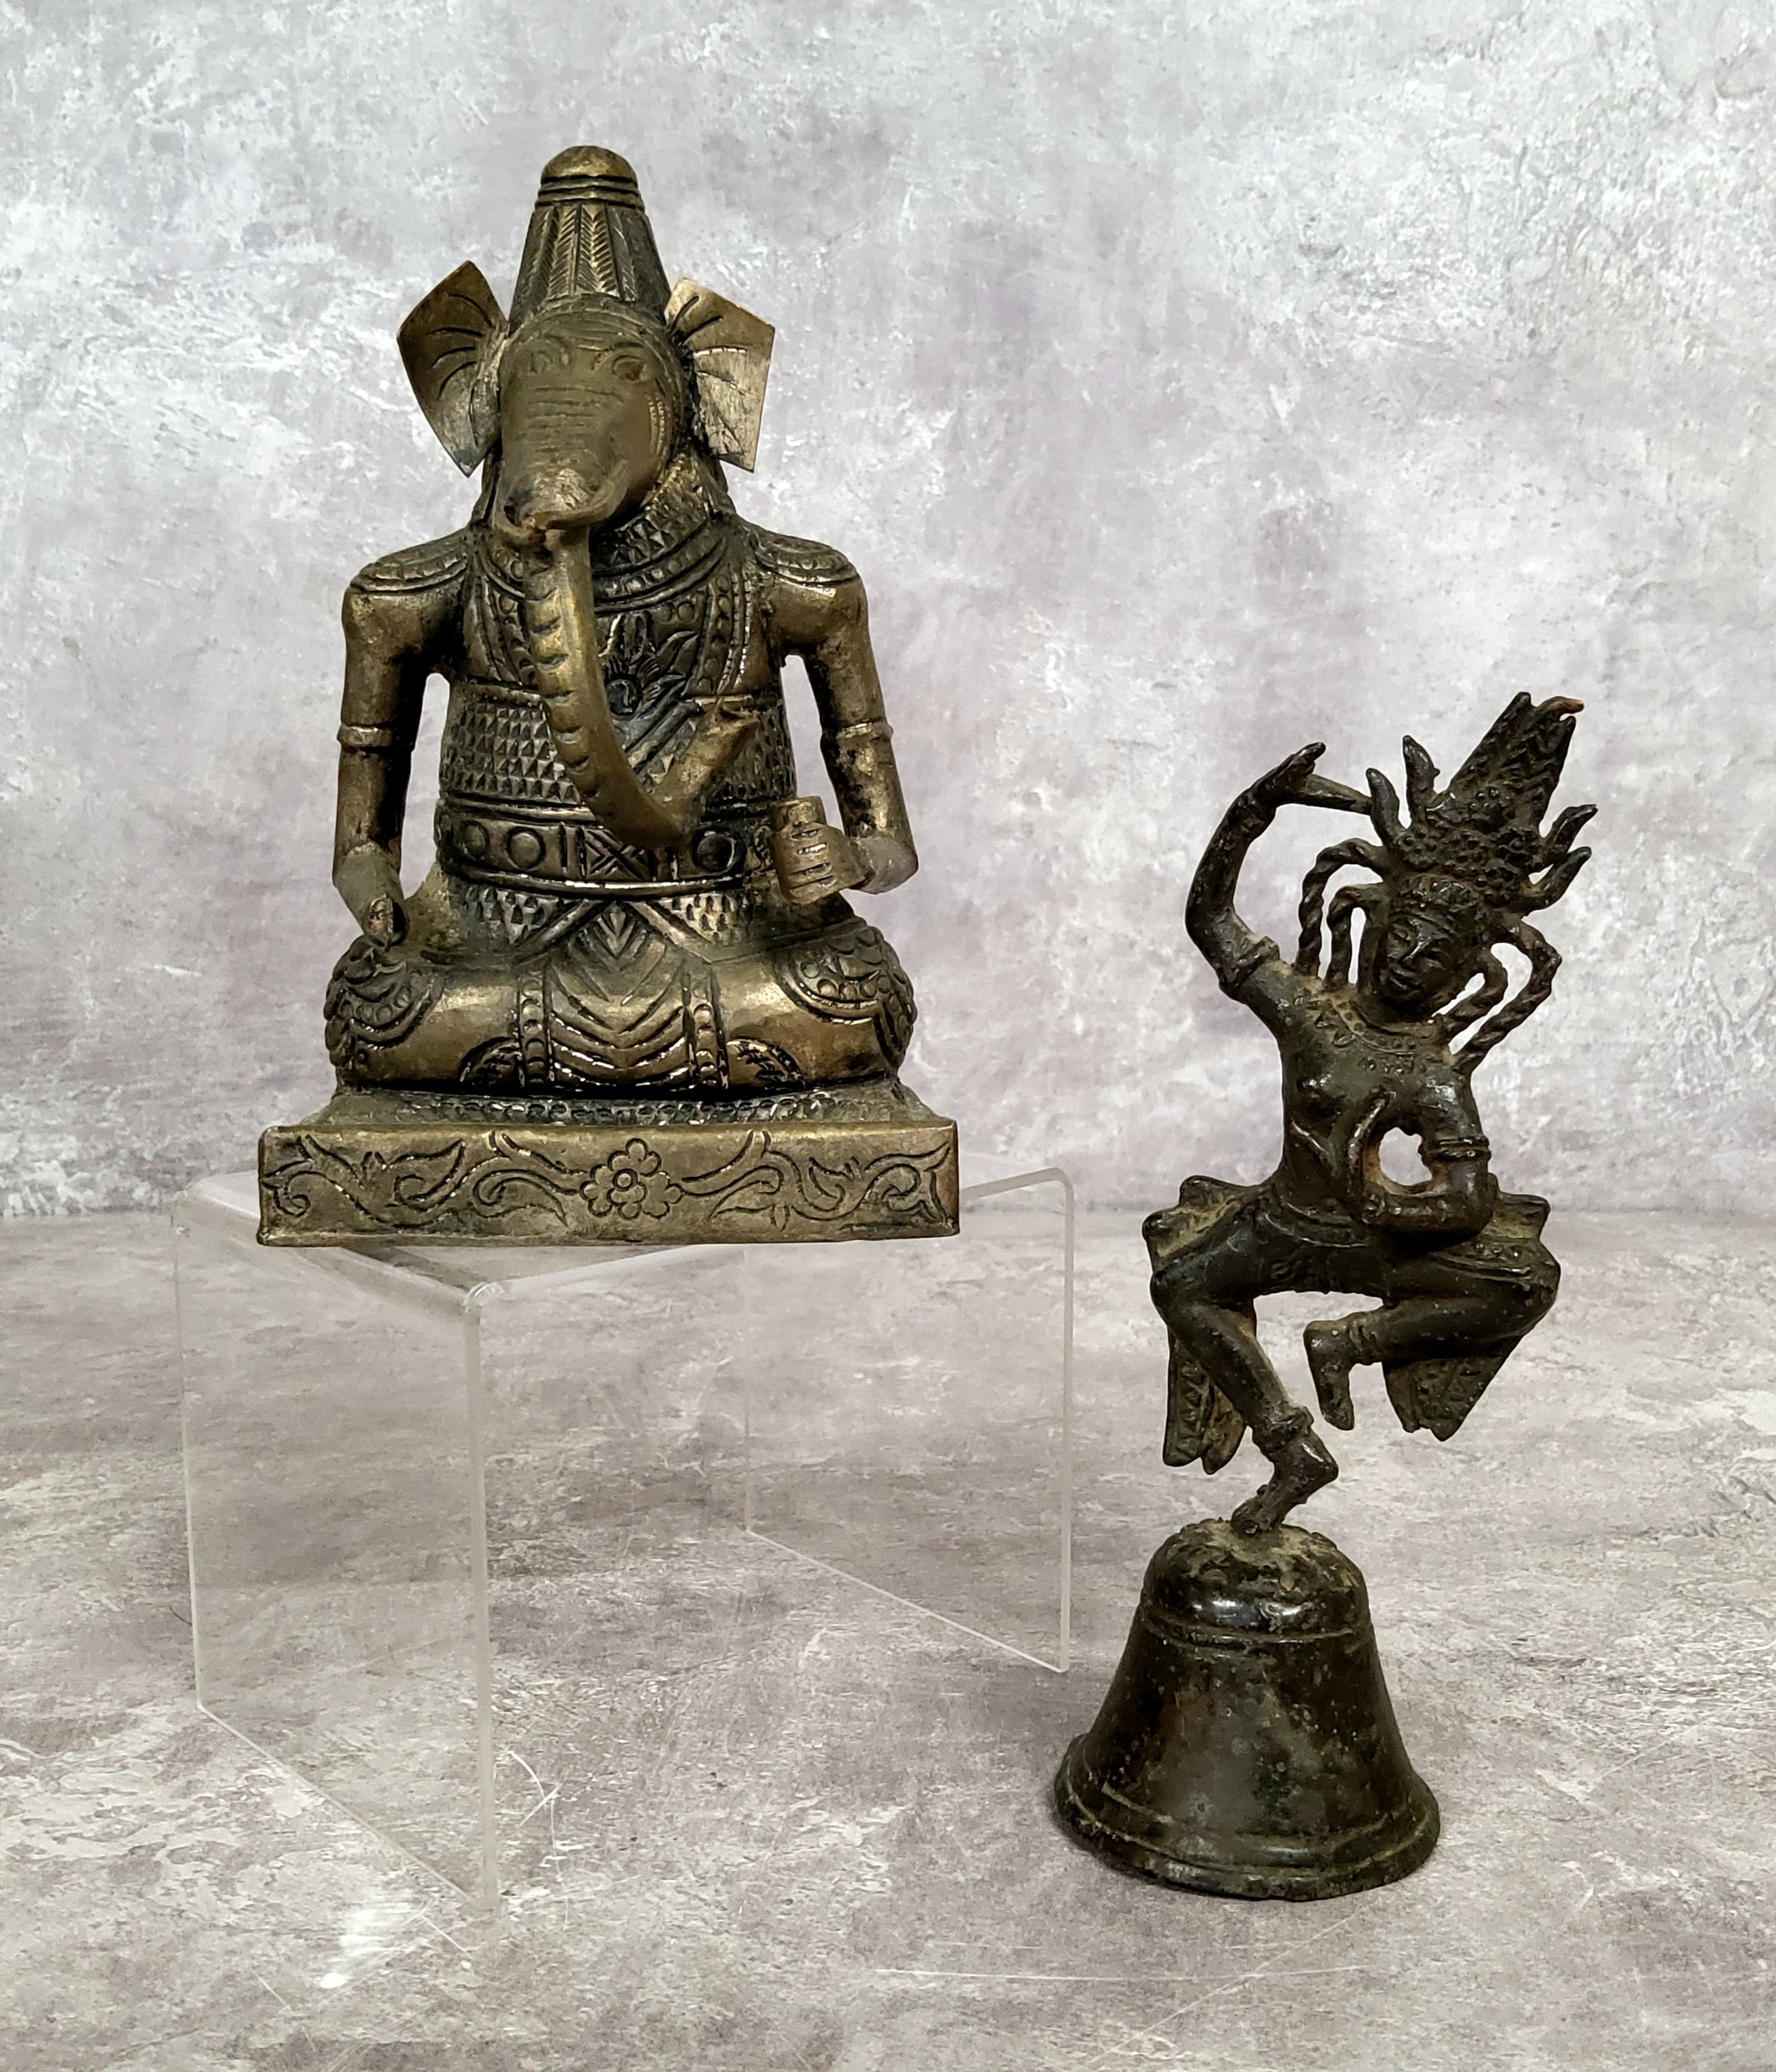 An early South East Asian Kymer bronze of a dancer and an Indian library figure of Ganesha,